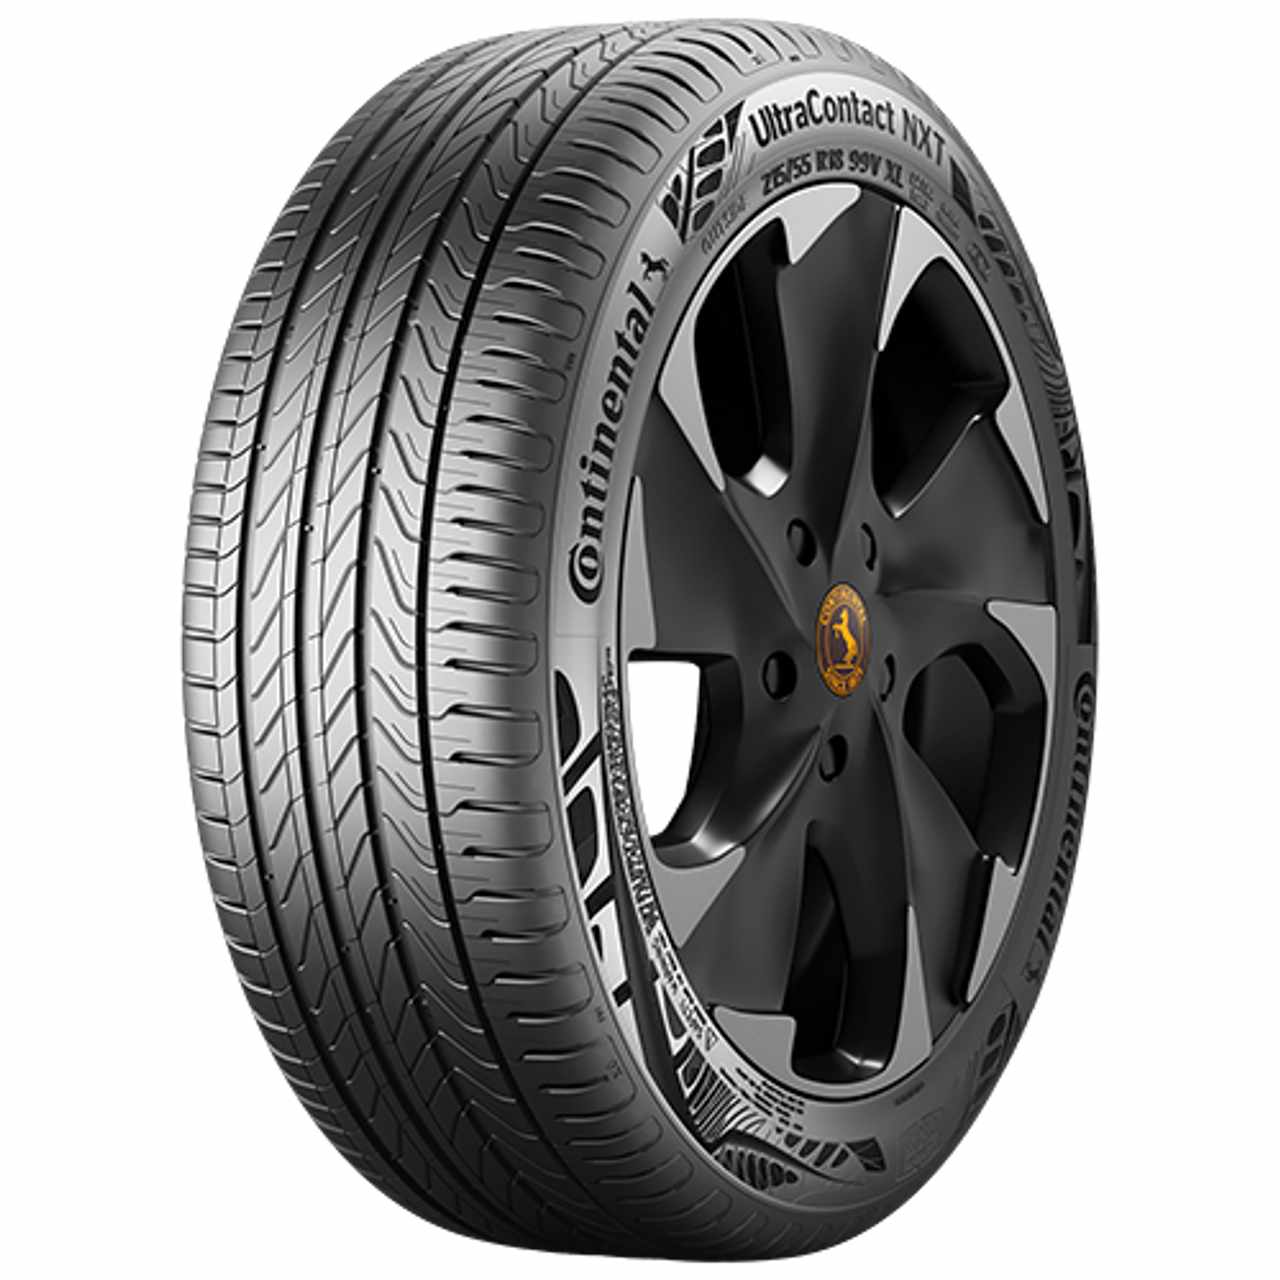 CONTINENTAL ULTRACONTACT NXT (EVc) 245/50R20 105V FR BSW XL